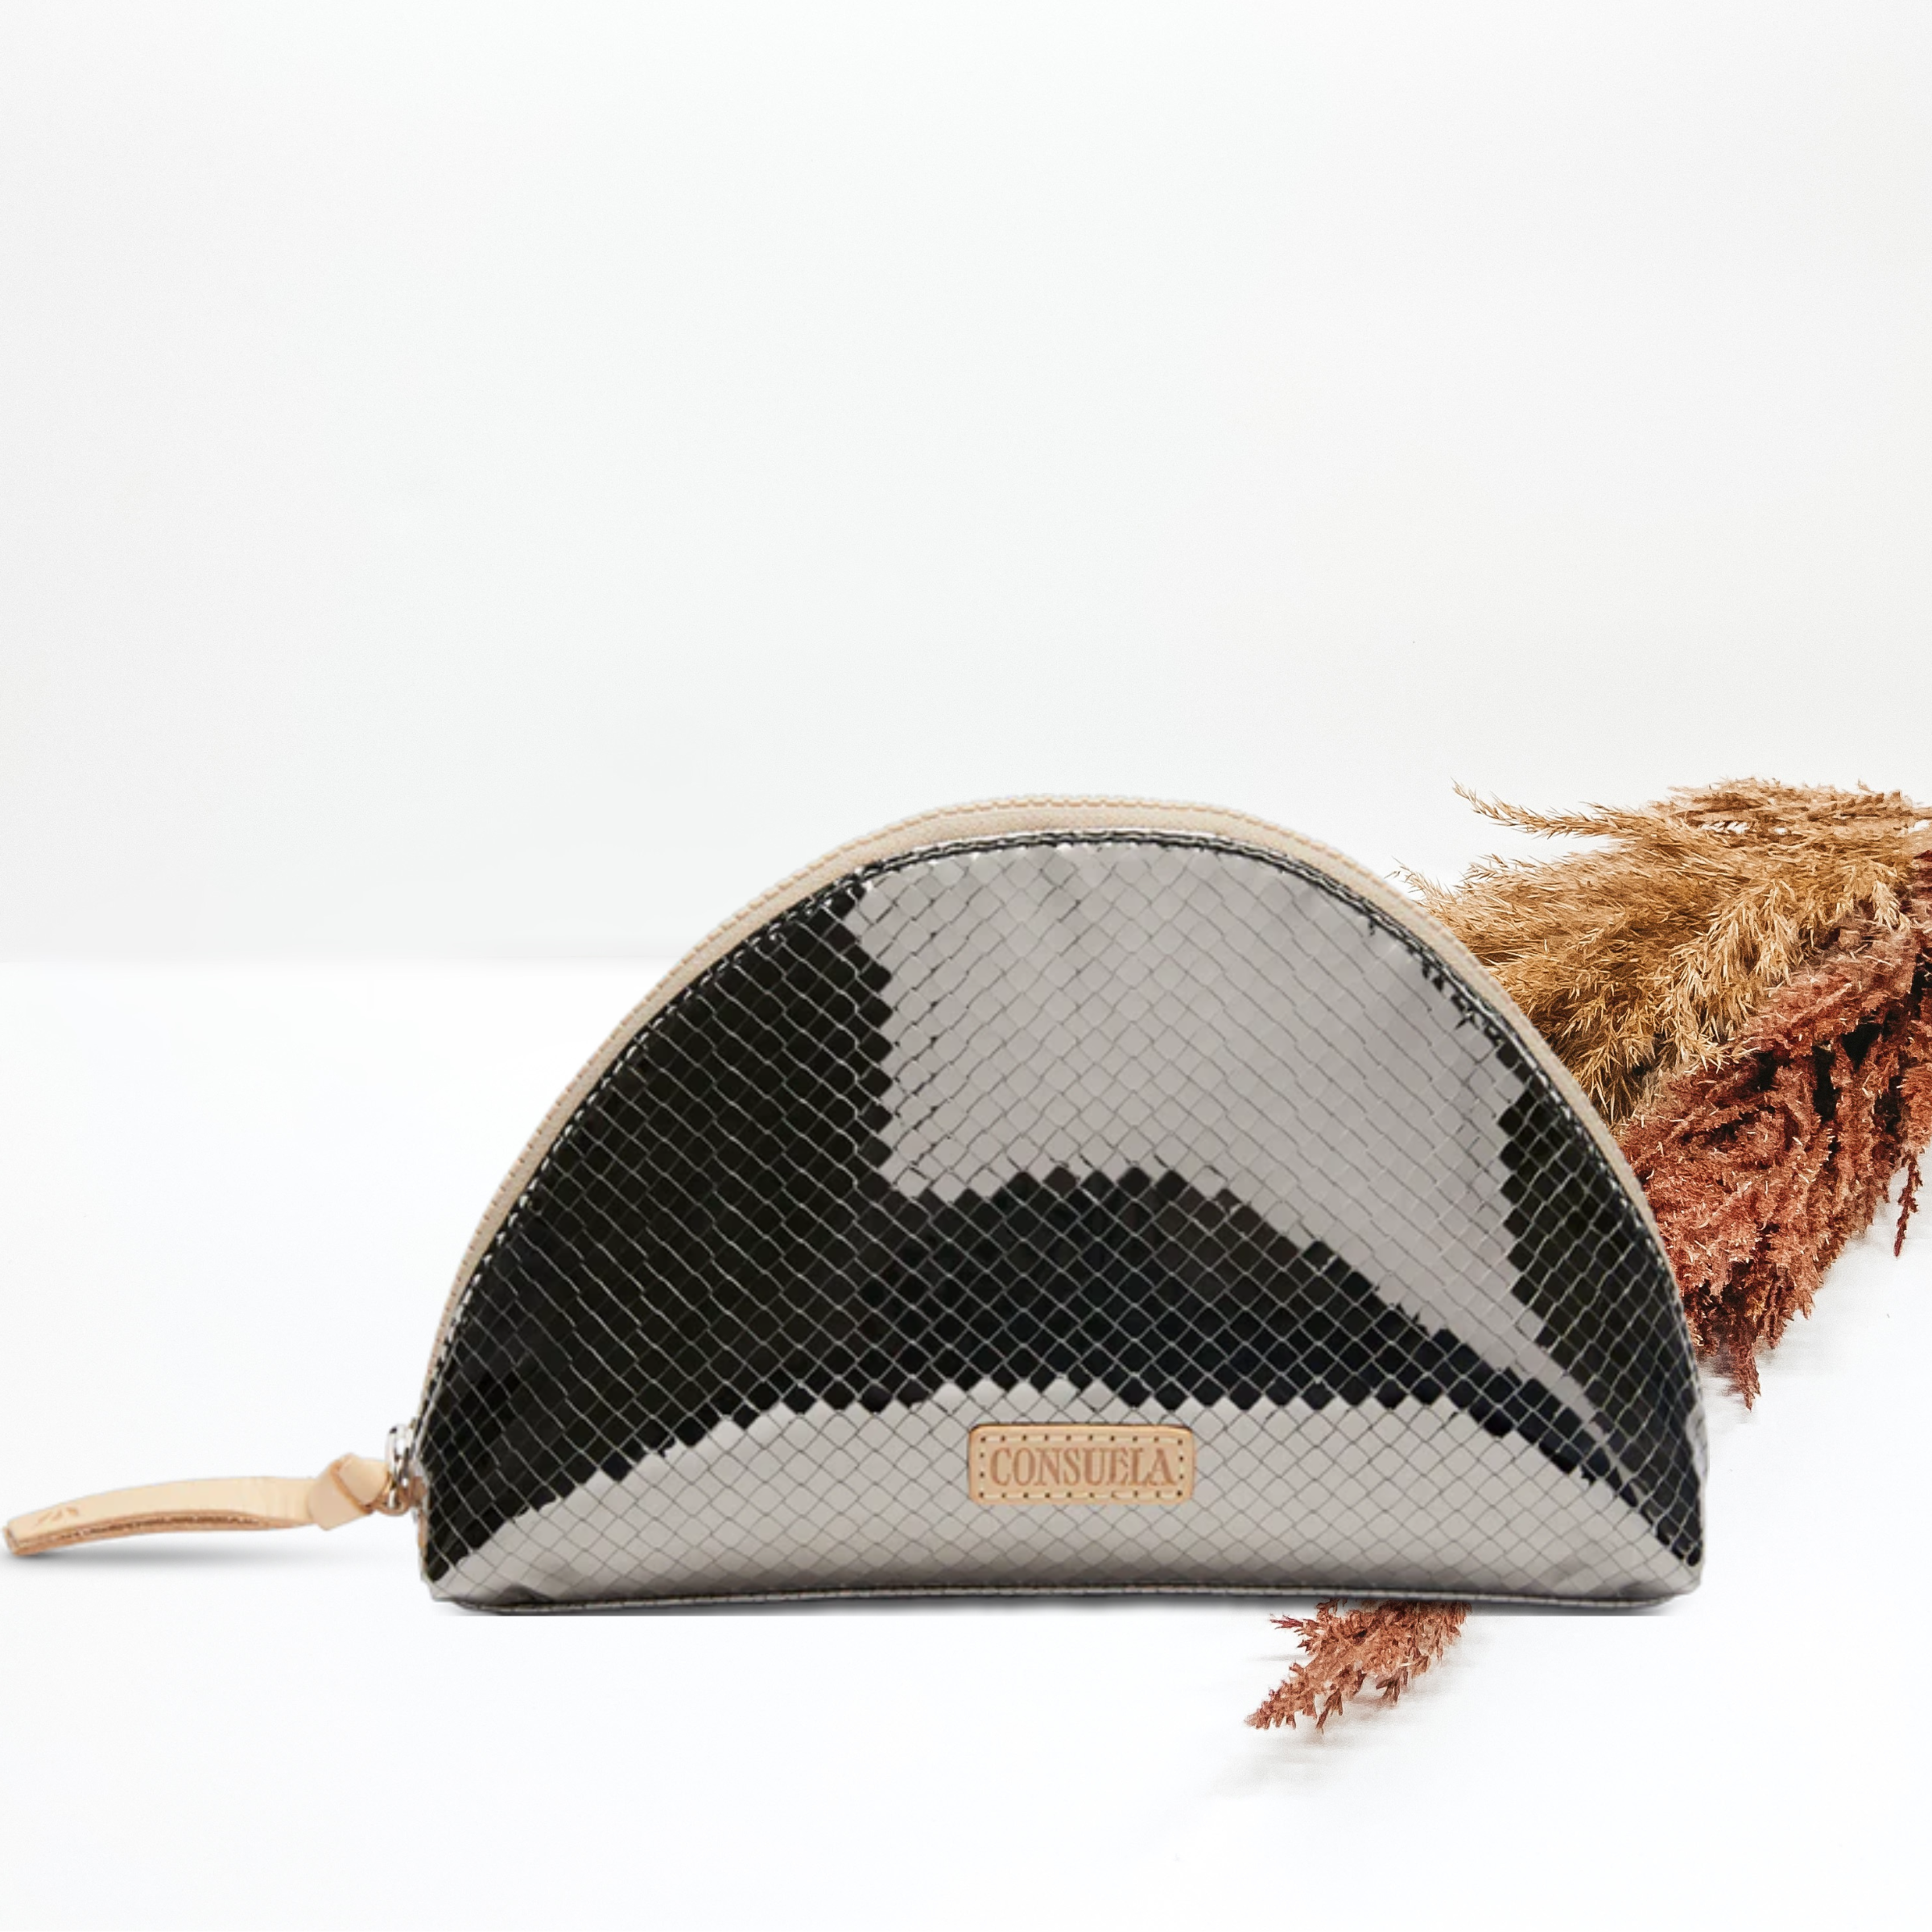 Pictured is a dome shaped cosmetic bag. This bag is metallic silver with a woven design and includes a top zipper. This purse is pictured on a white background with pompous grass on the right side of the picture.